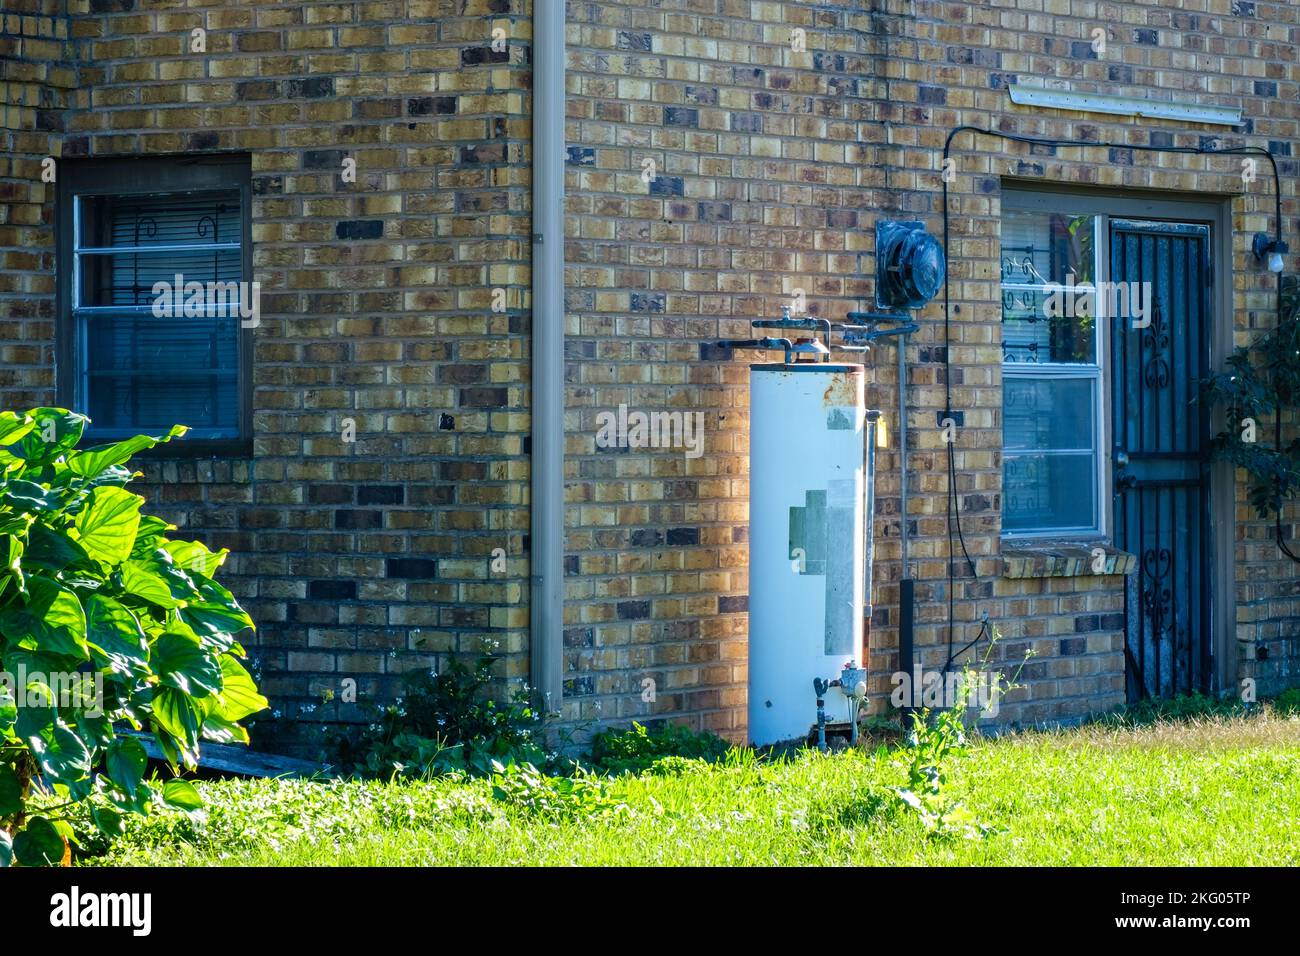 NEW ORLEANS, LA, USA - NOVEMBER 13, 2022: Exposed conventional water heater, with sunlight reflection, on exterior of residential building. Stock Photo